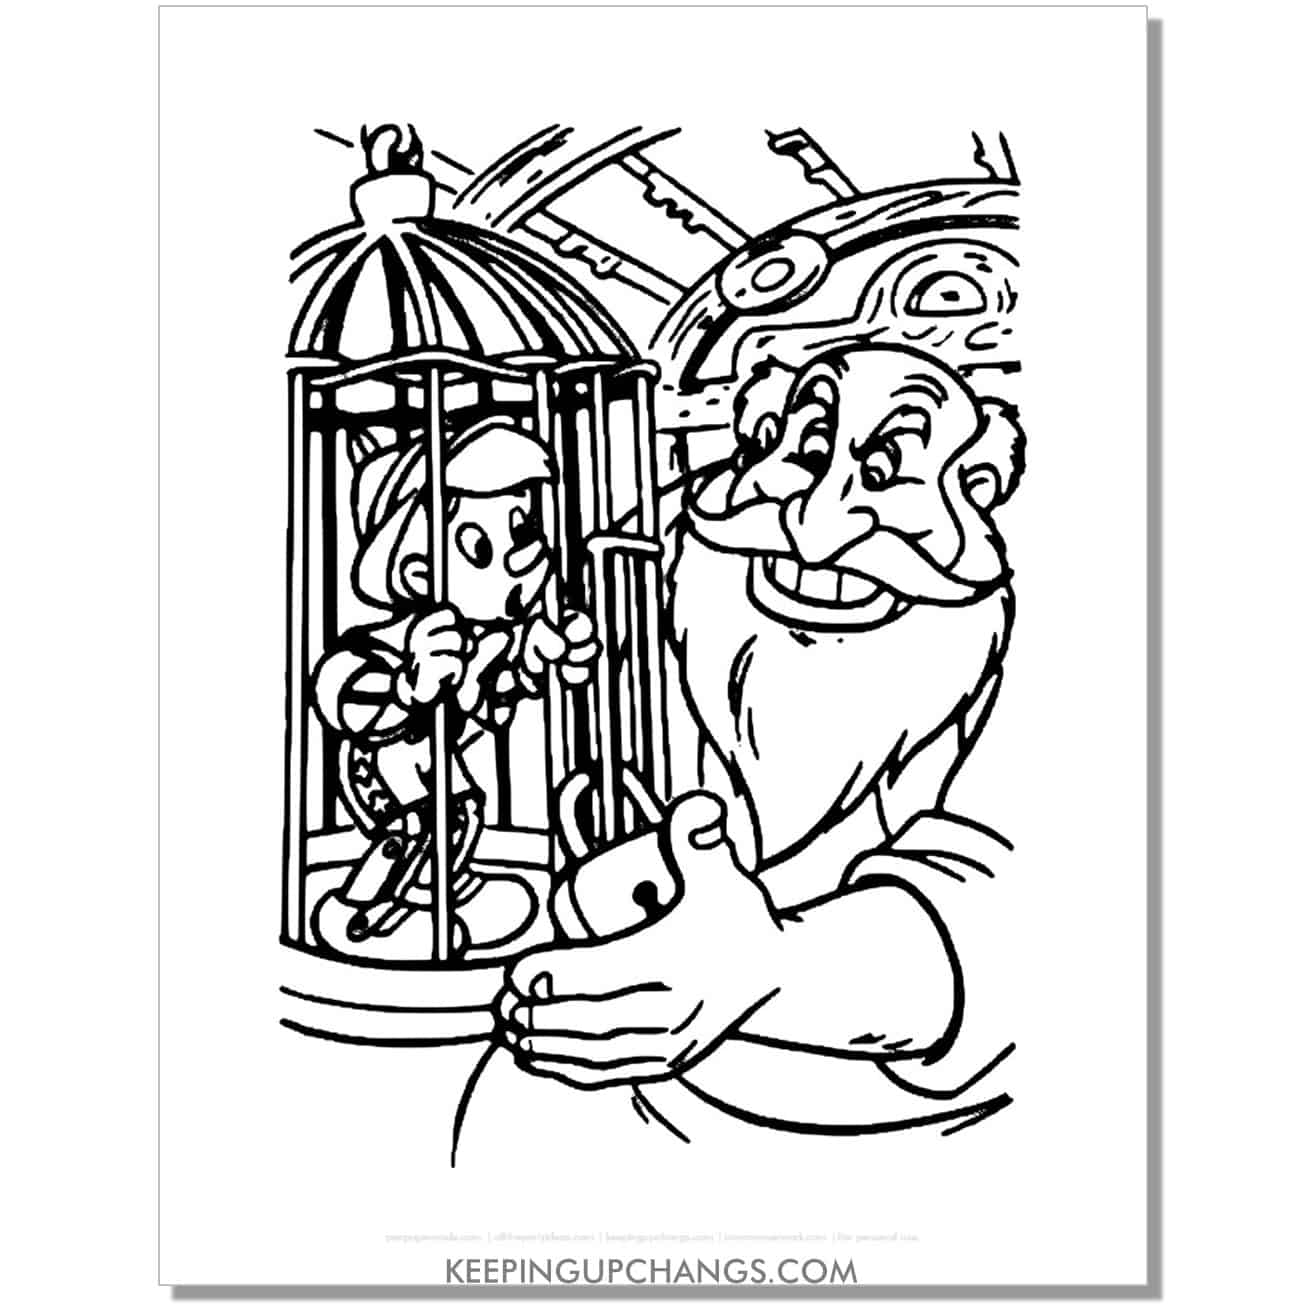 pinocchio locked in cage by stromboli coloring page, sheet.